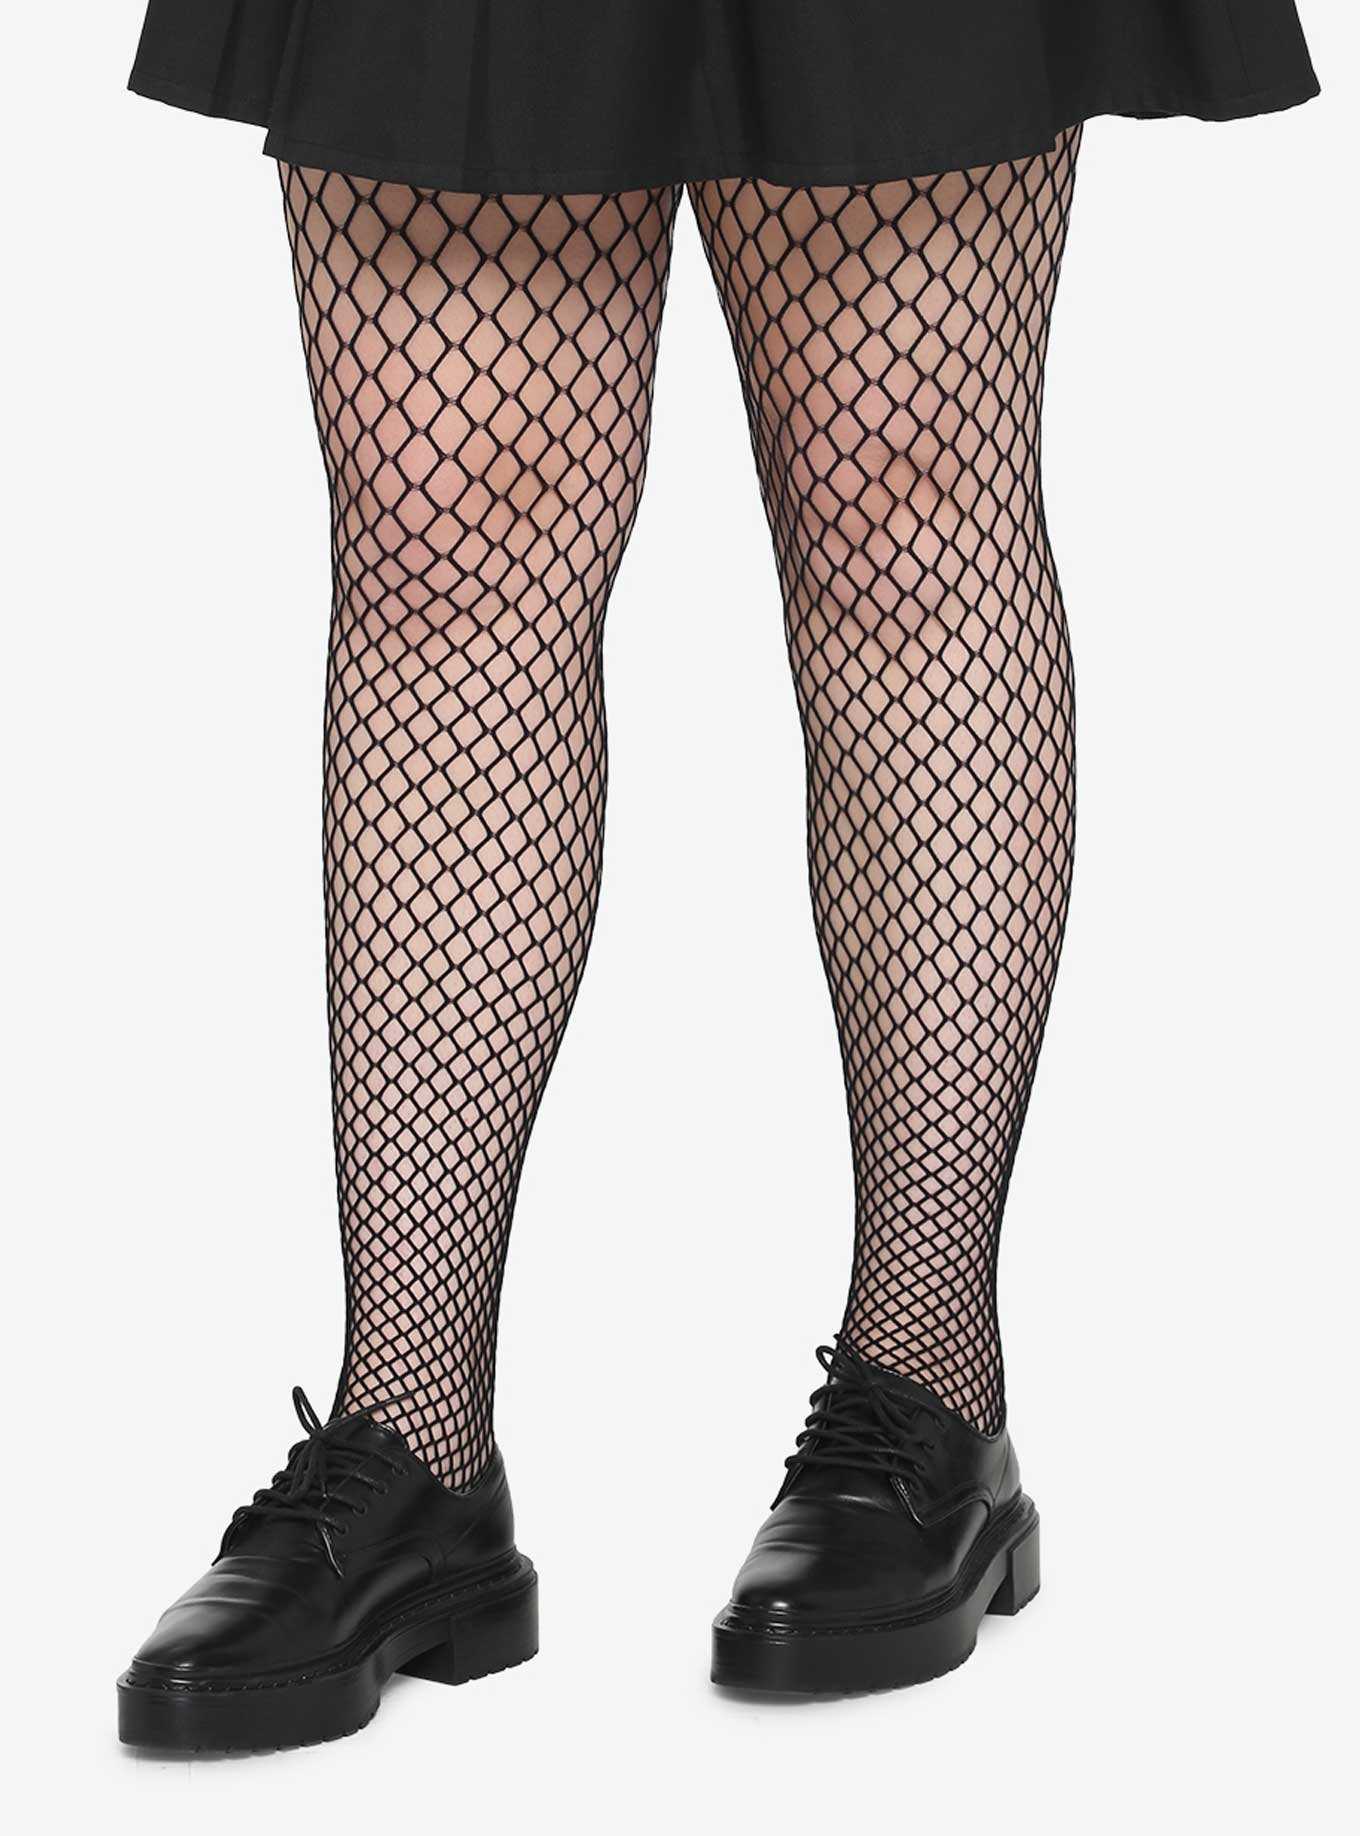 Hot Topic White Bow Cutout Fishnet Tights